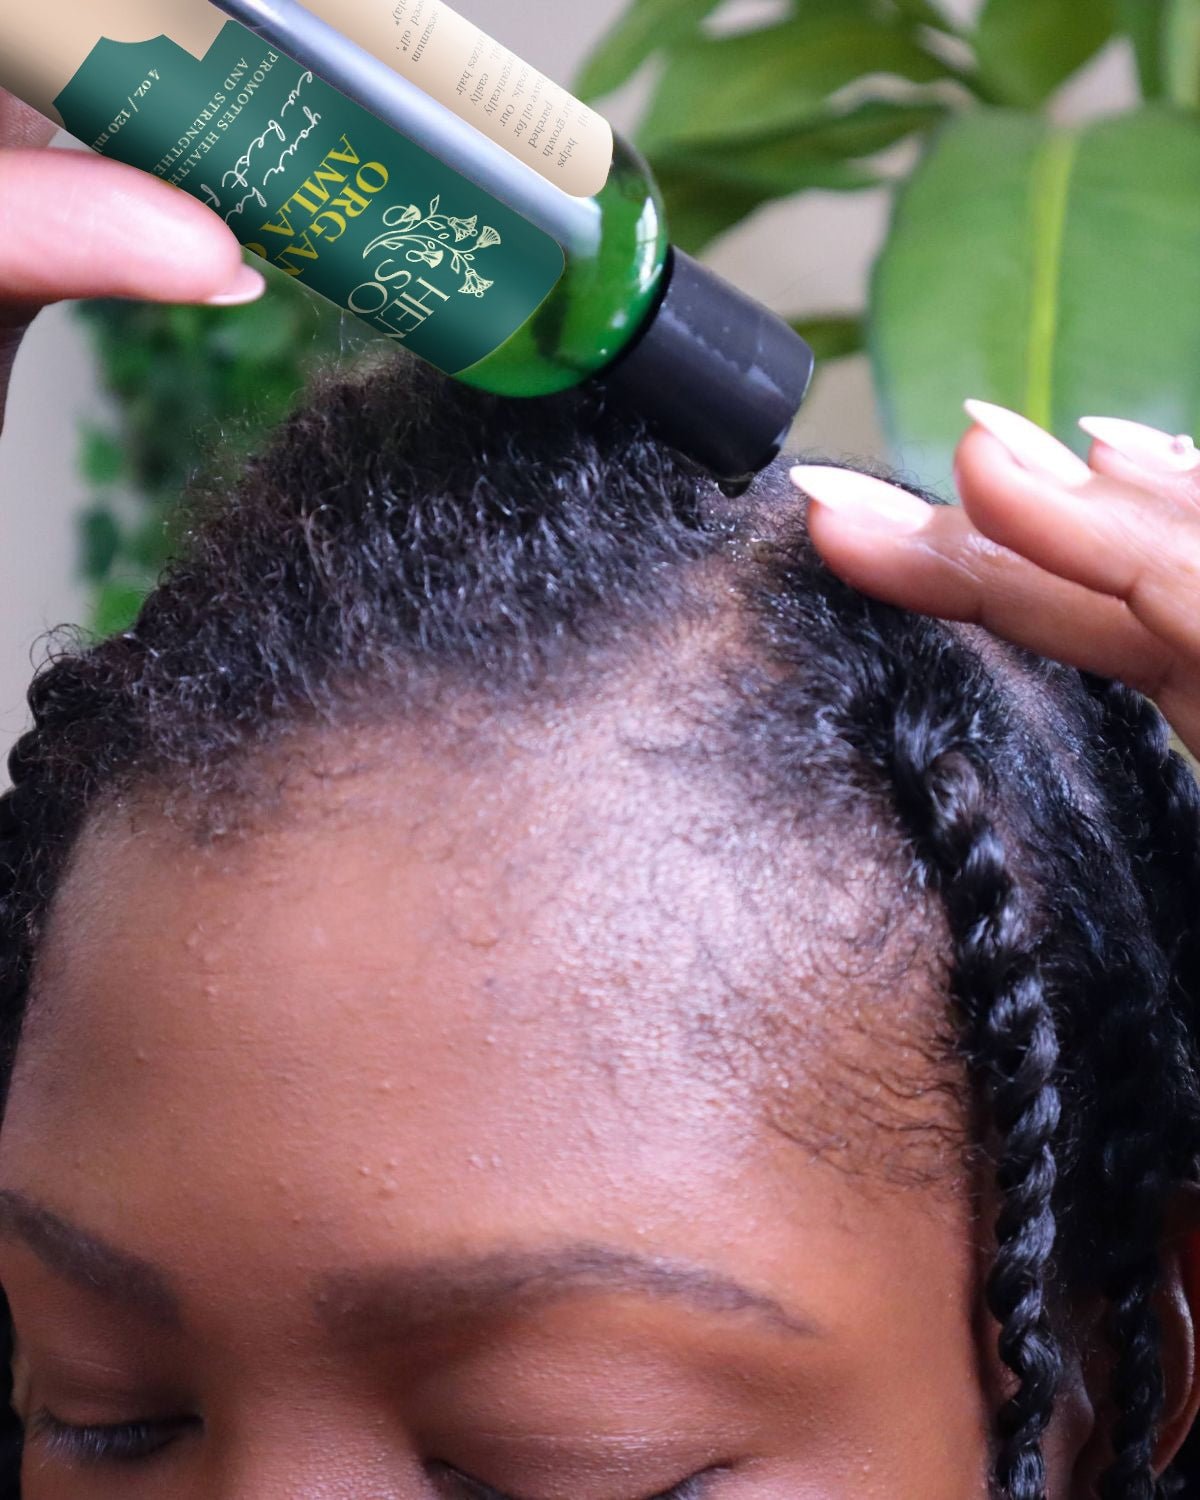 Where the Amla At, Tho? - Using Amla Oil to Promote Hair Growth